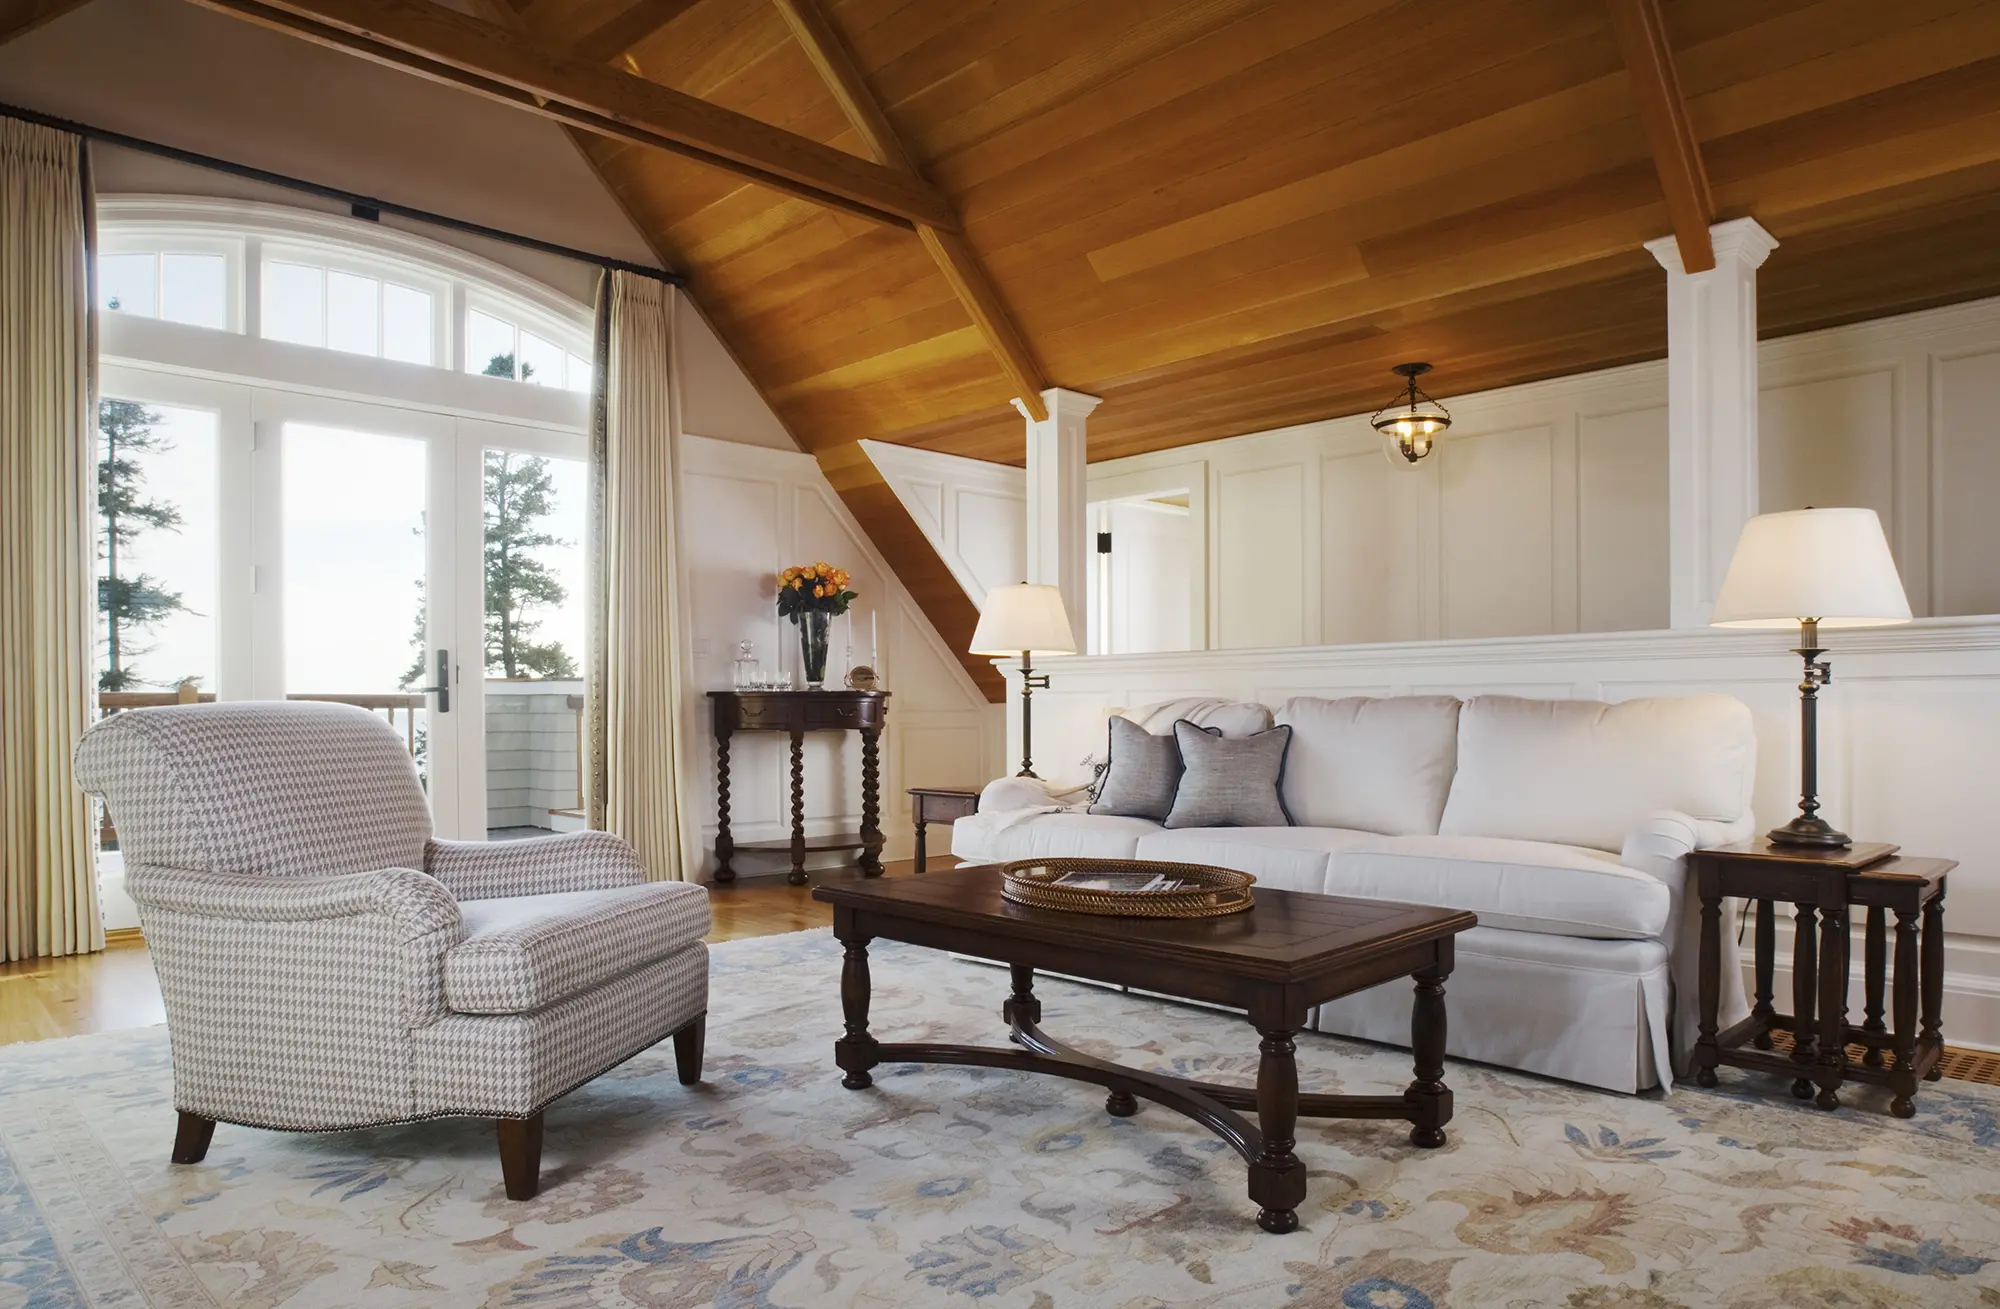 Up stairs living room of boathouse with cathedral ceilings